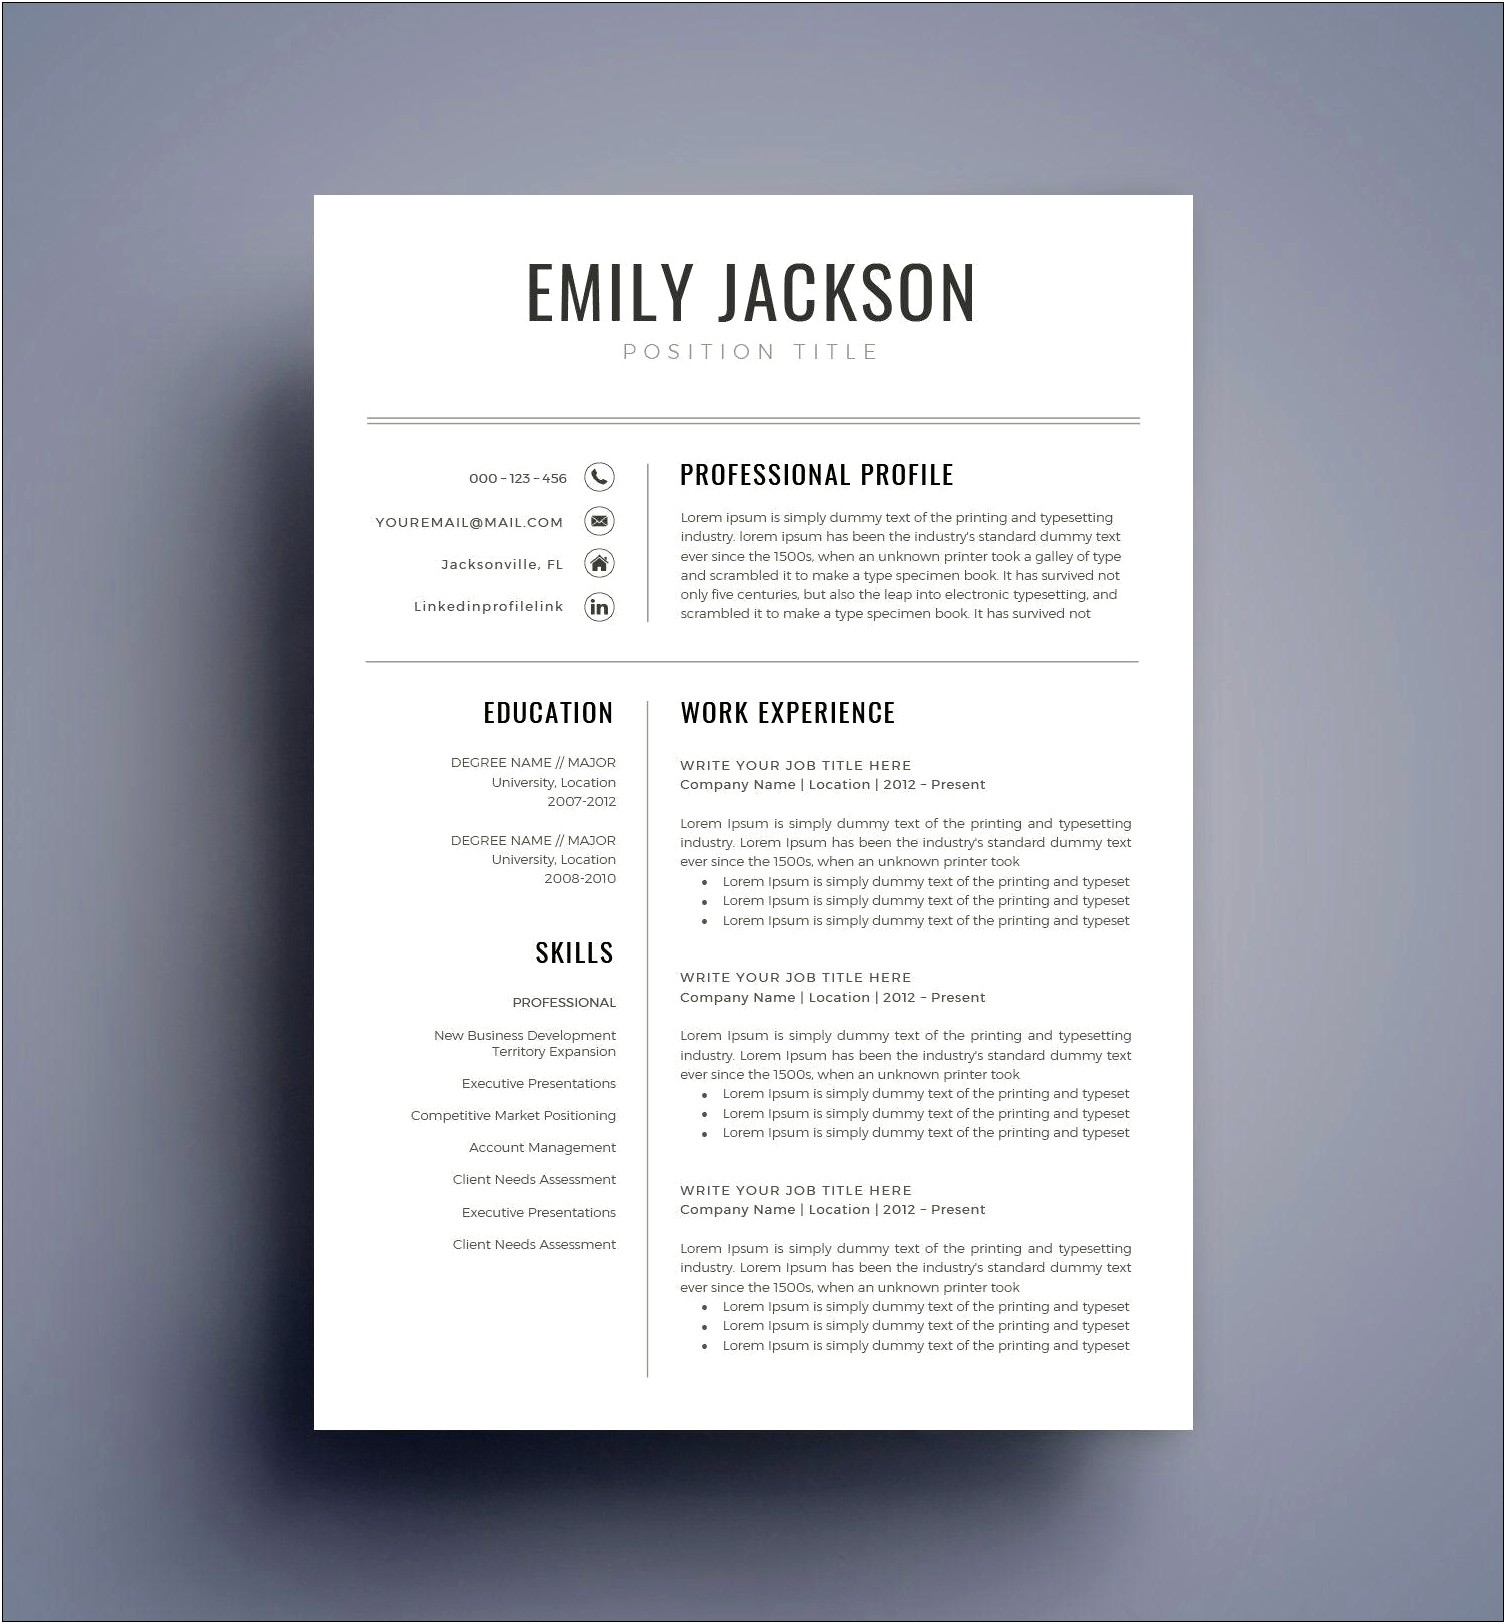 Resume Download In Ms Word 2007